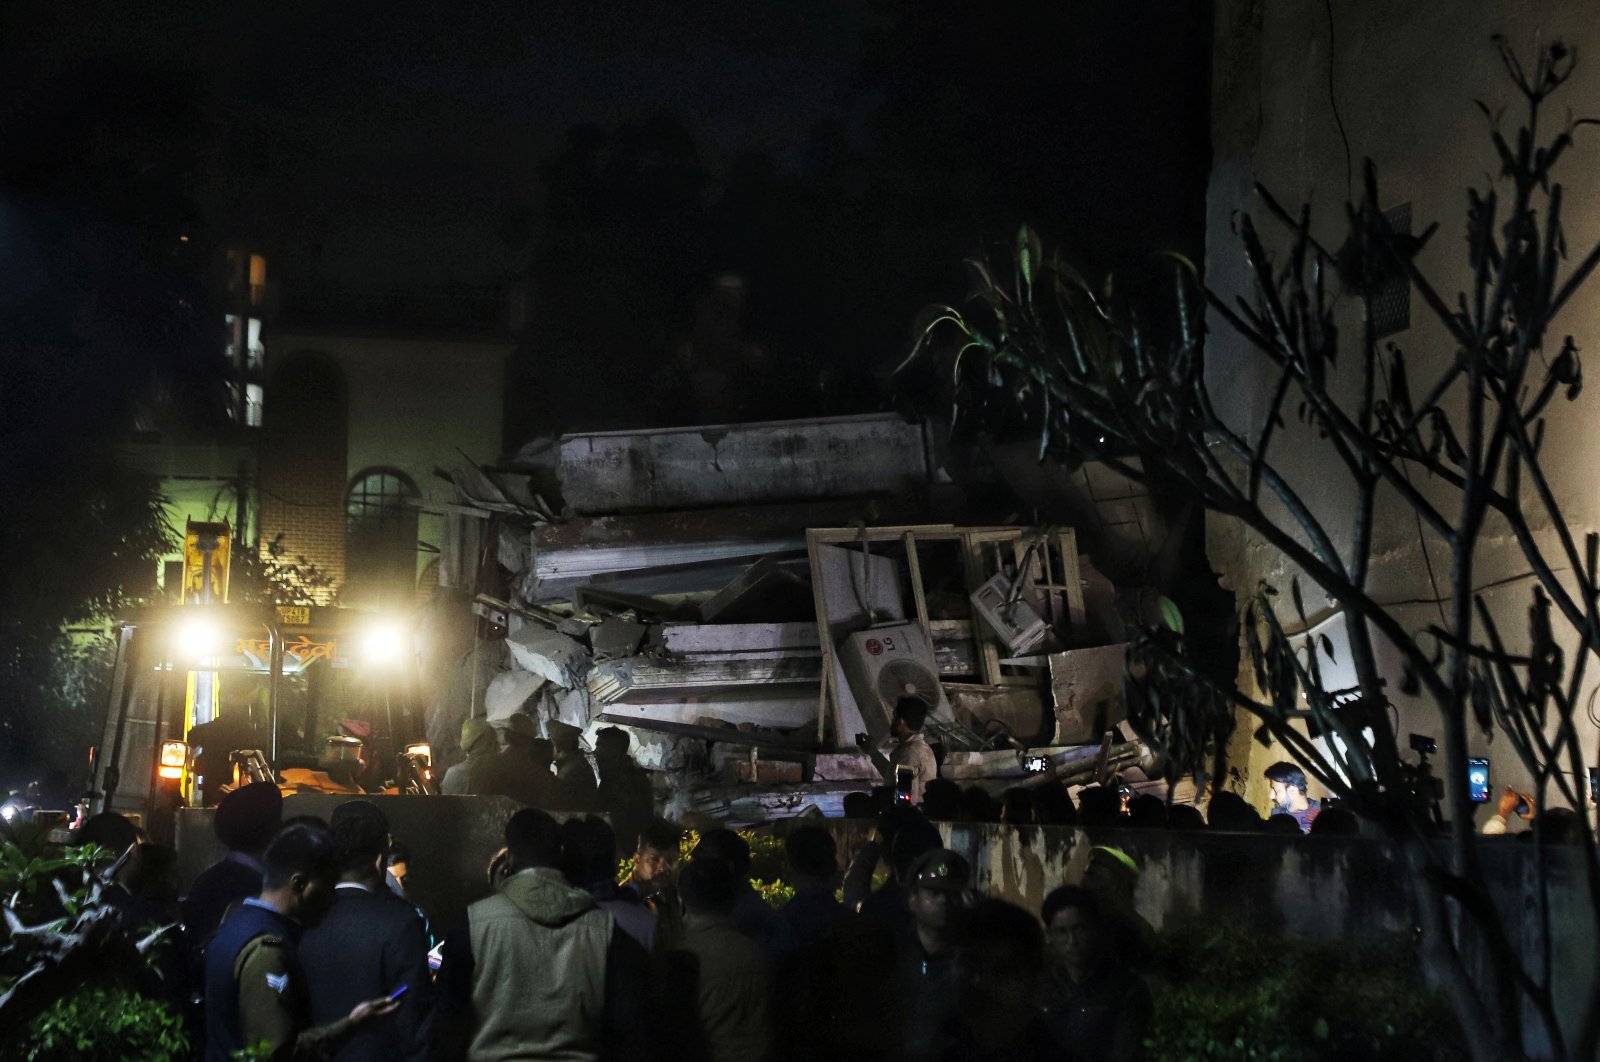 Rescue teams search for survivors on the debris of a residential building that collapsed in Lucknow on Jan. 24, 2023. (AFP Photo)